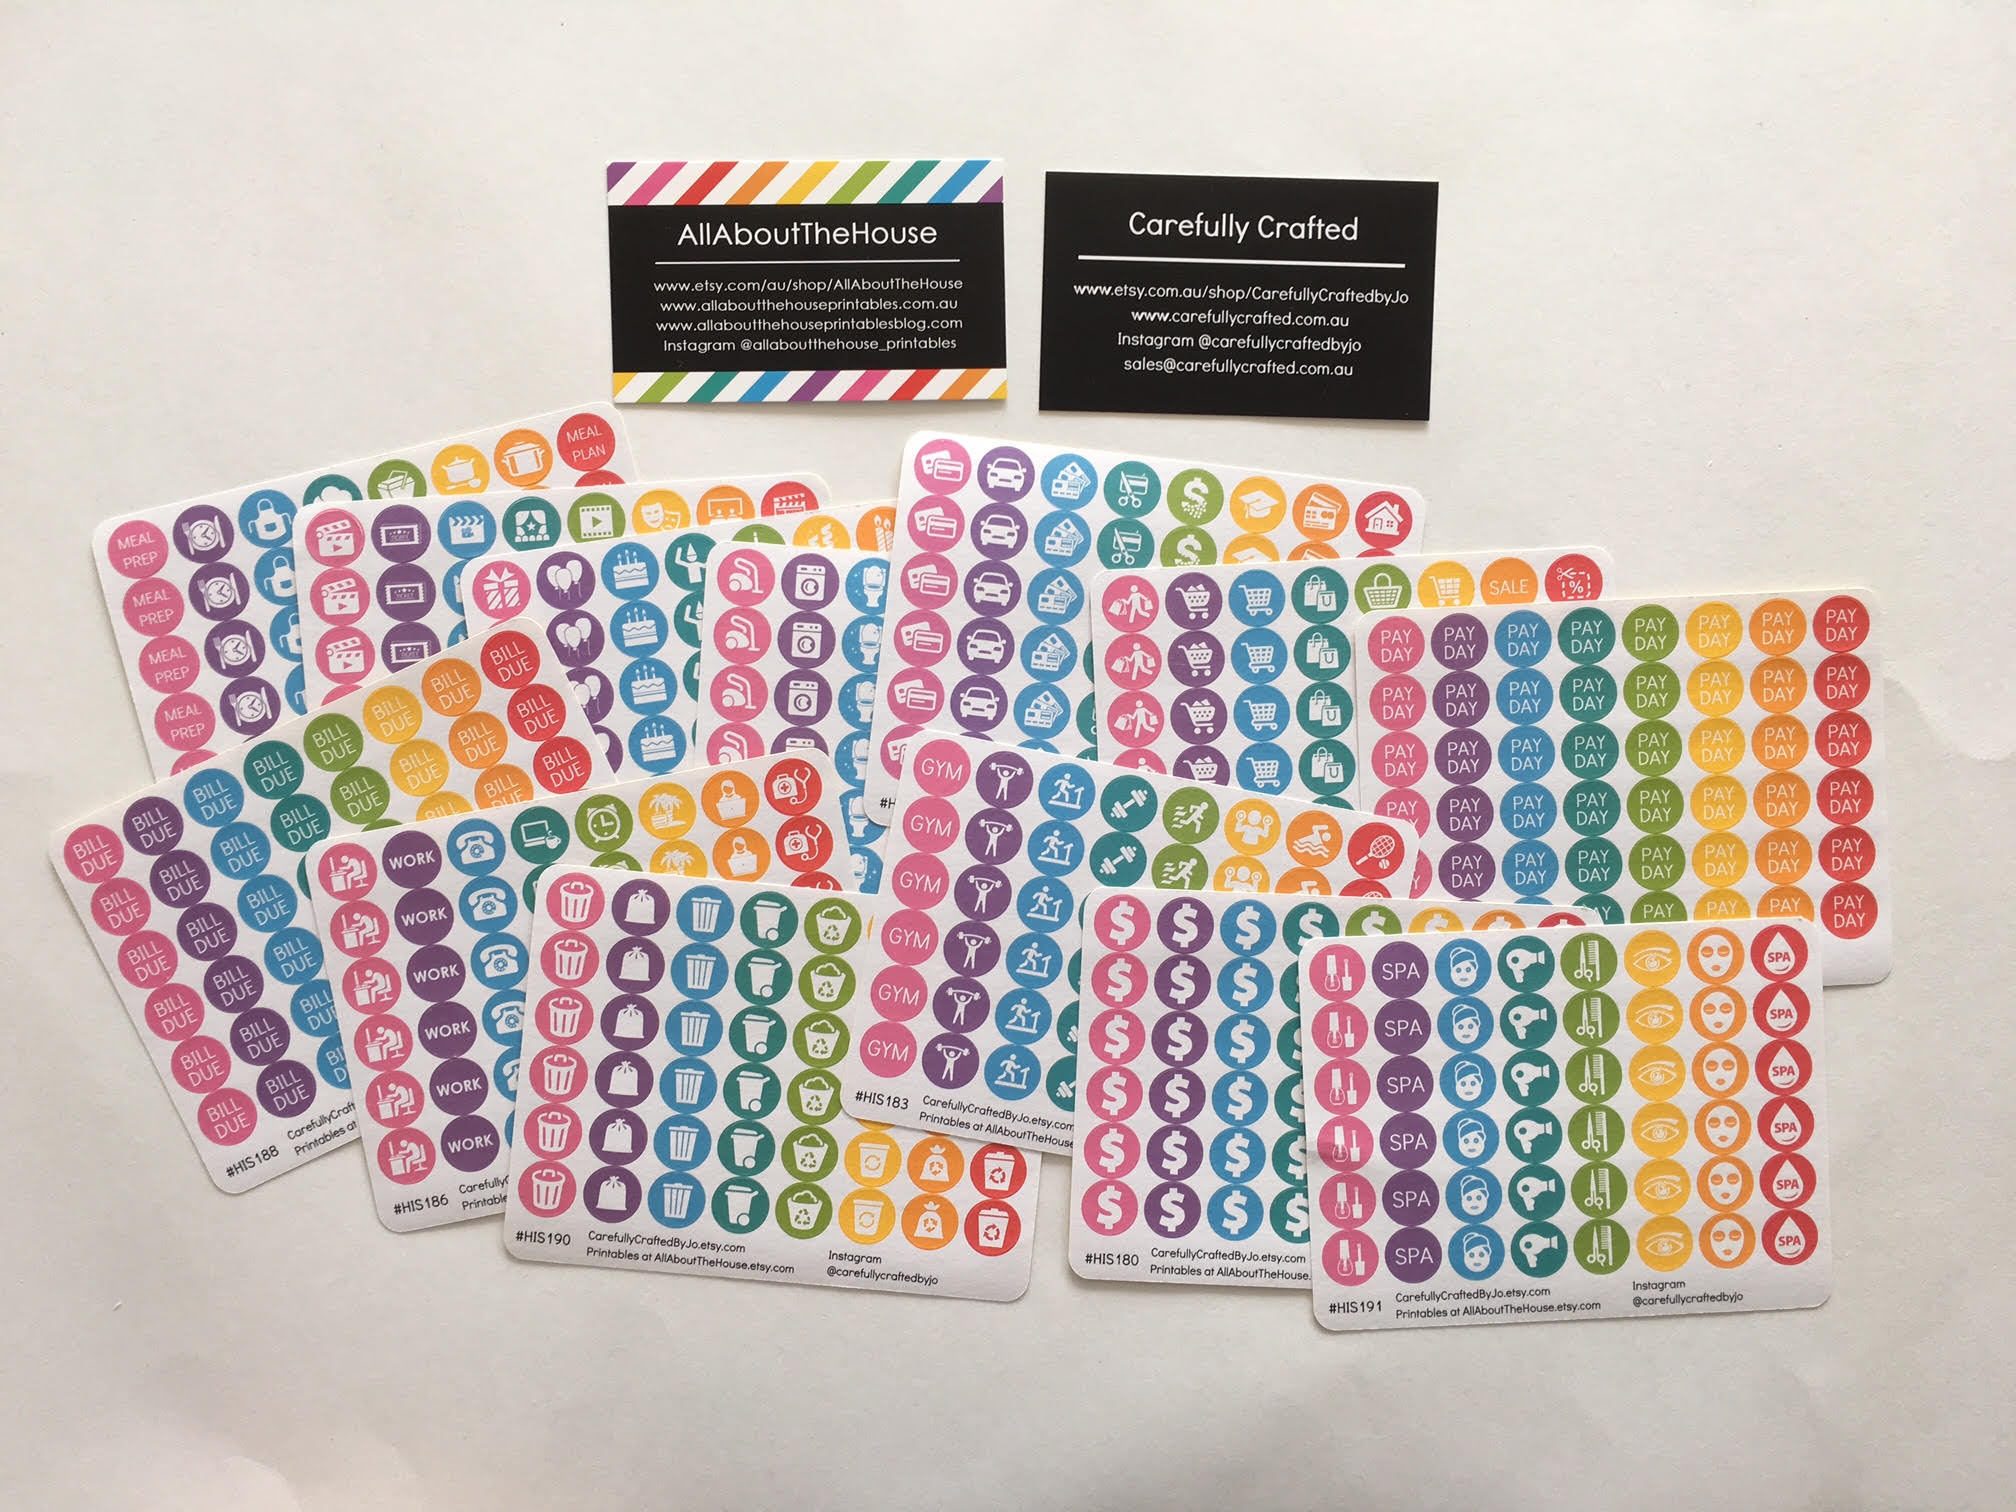 Colour Coding Stickers Planner Stickers Pastel Organisational Rainbow bill due stickers Functional Stickers